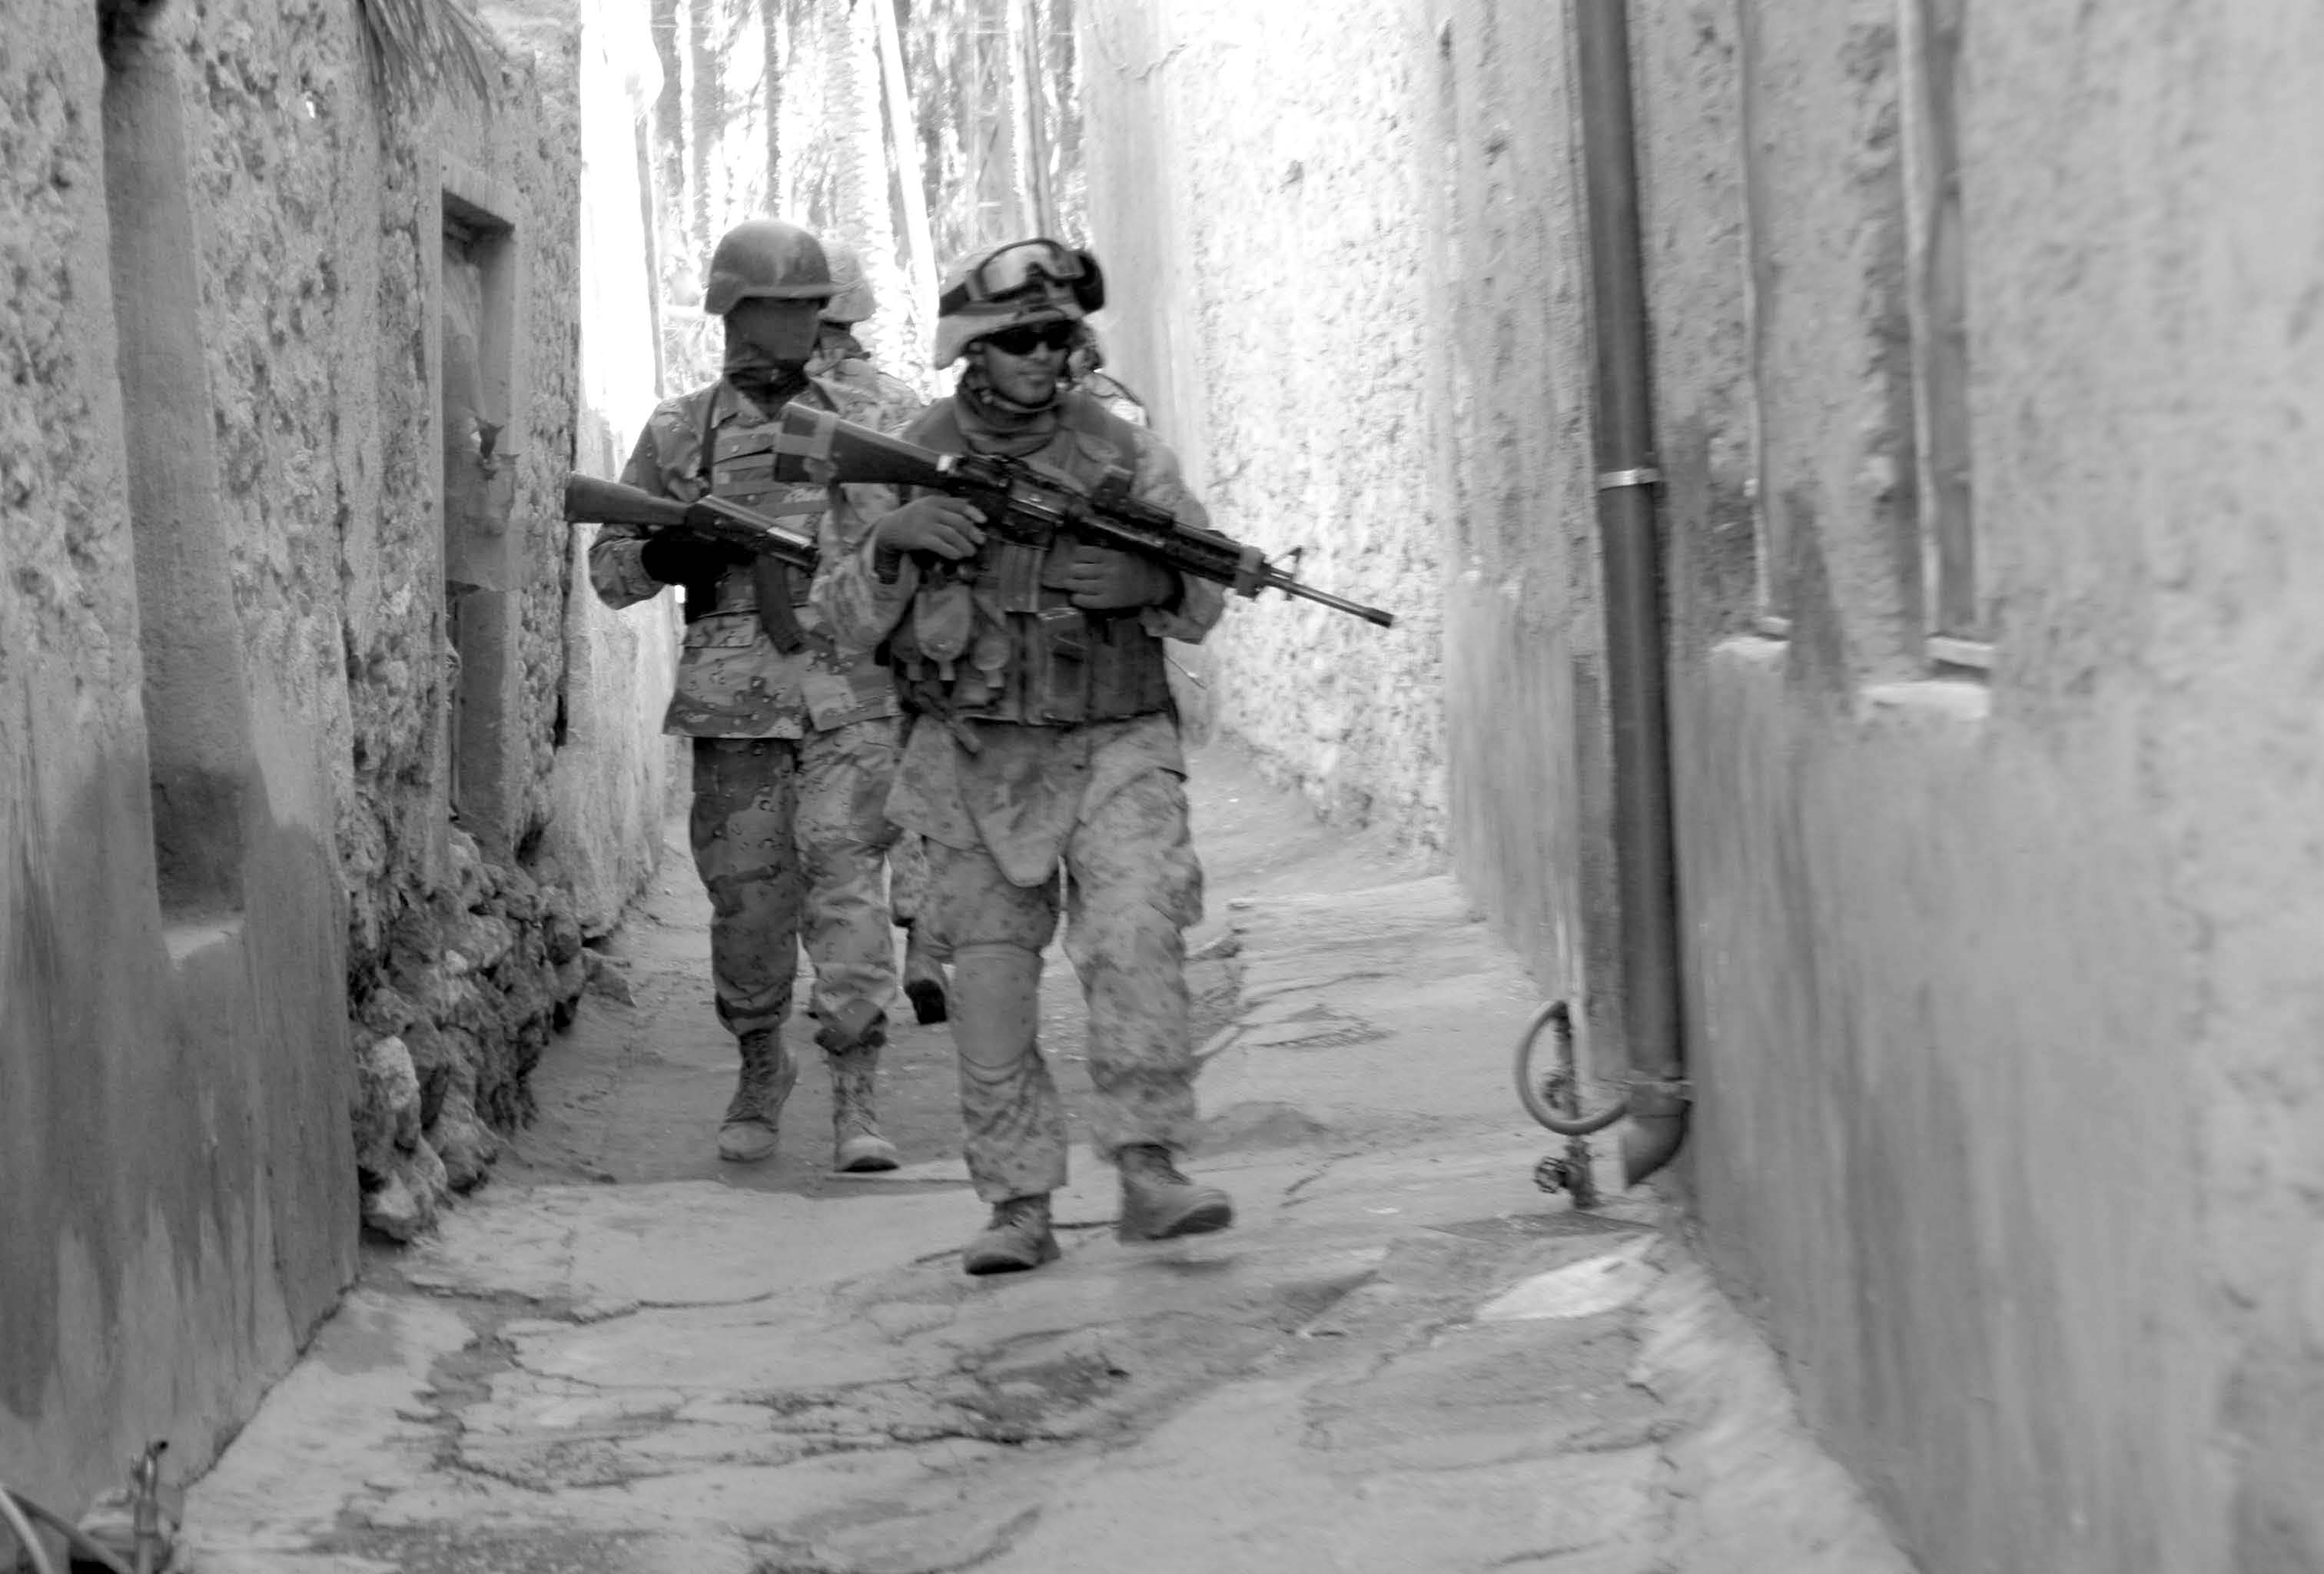 American and Iraqi soldiers conduct a security patrol through the streets of Barwana, Iraq, on January 15, 2006. Courtesy of DoD.